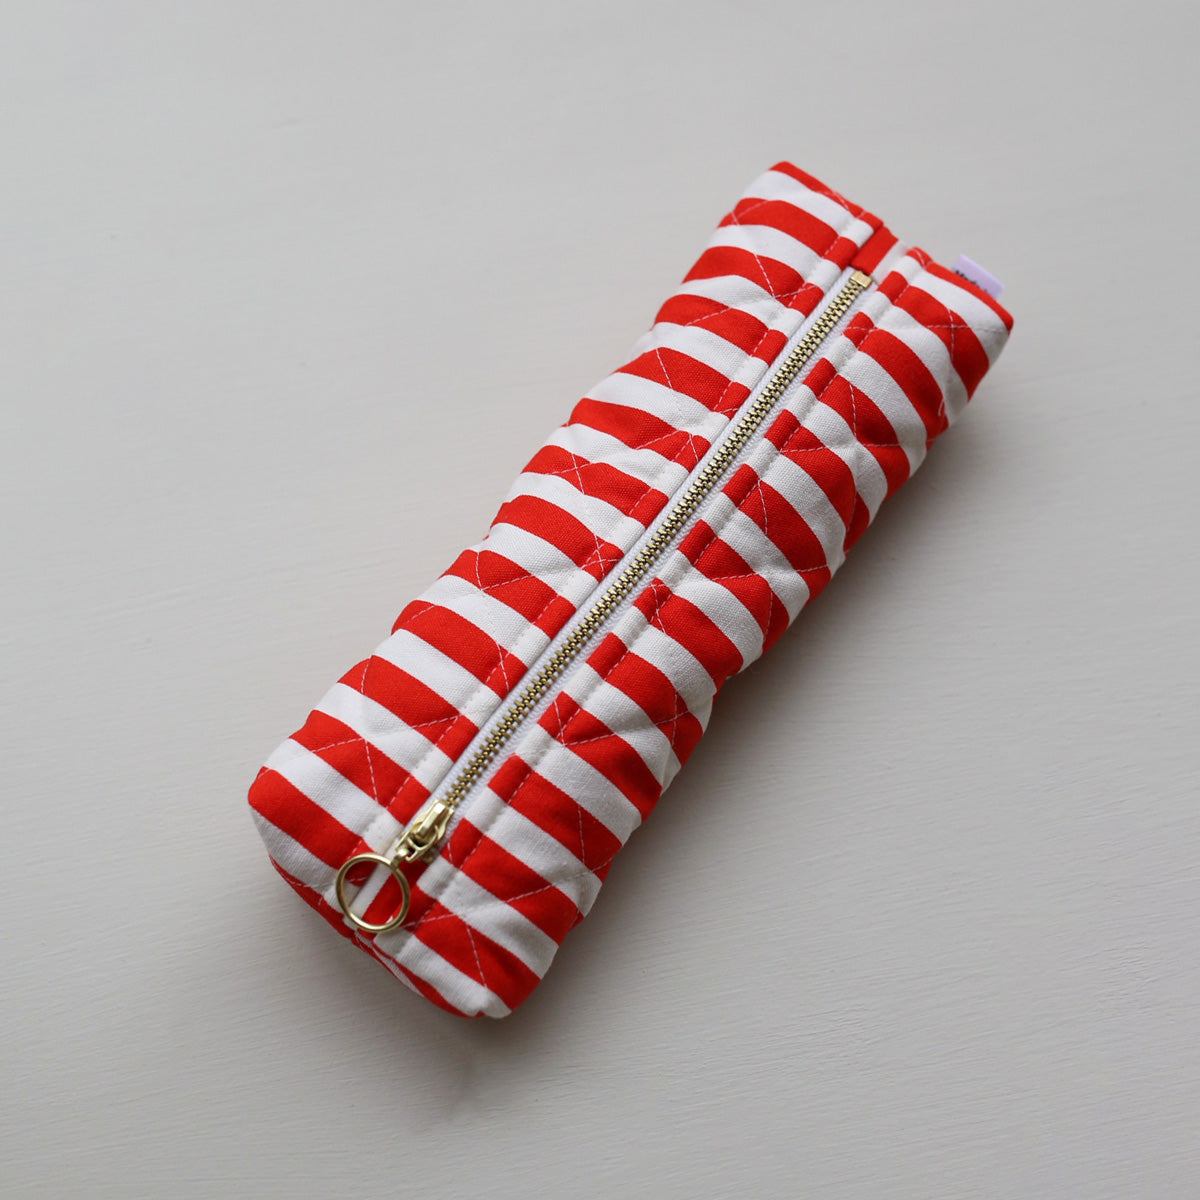 PEN CASE // THIN RED STRIPES